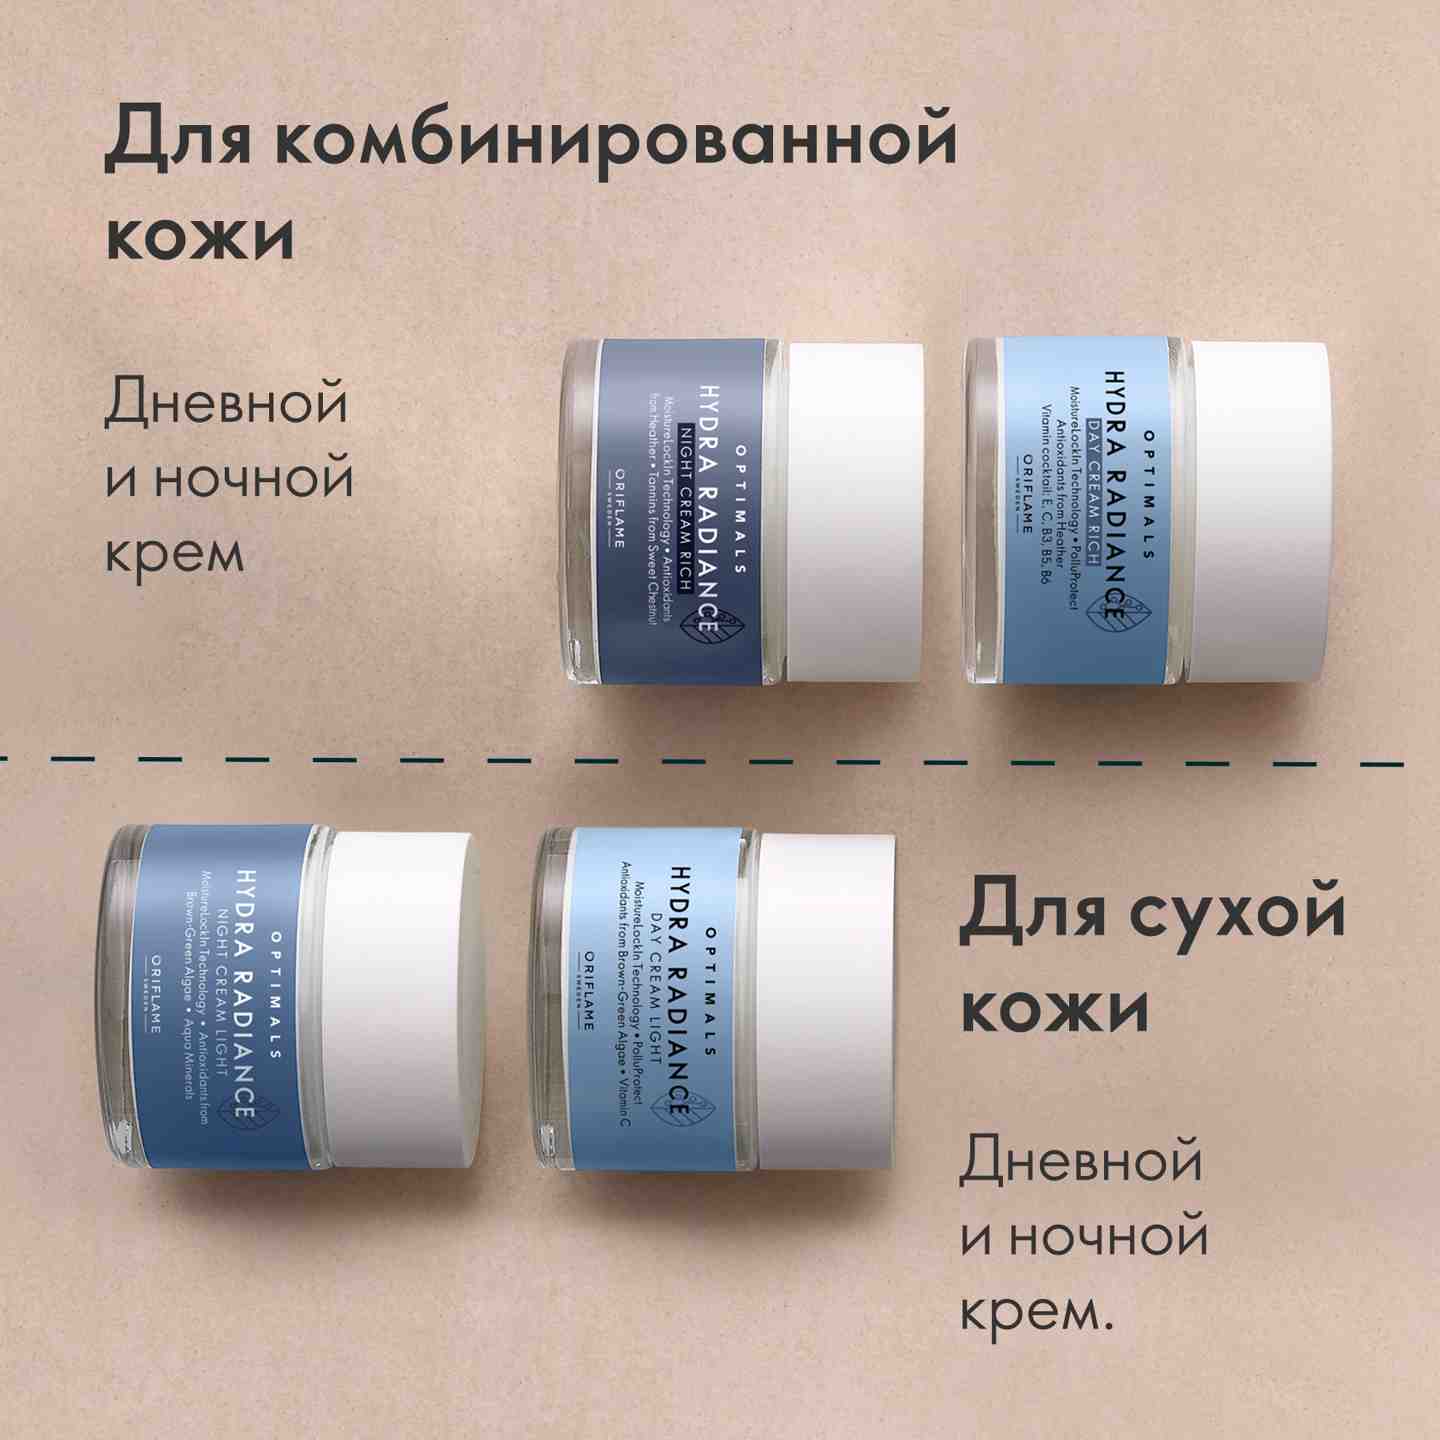 https://media-cdn.oriflame.com/productImage?externalMediaId=product-management-media%2fProducts%2f42589%2fAZ%2f42589_4.png&id=15124888&version=1